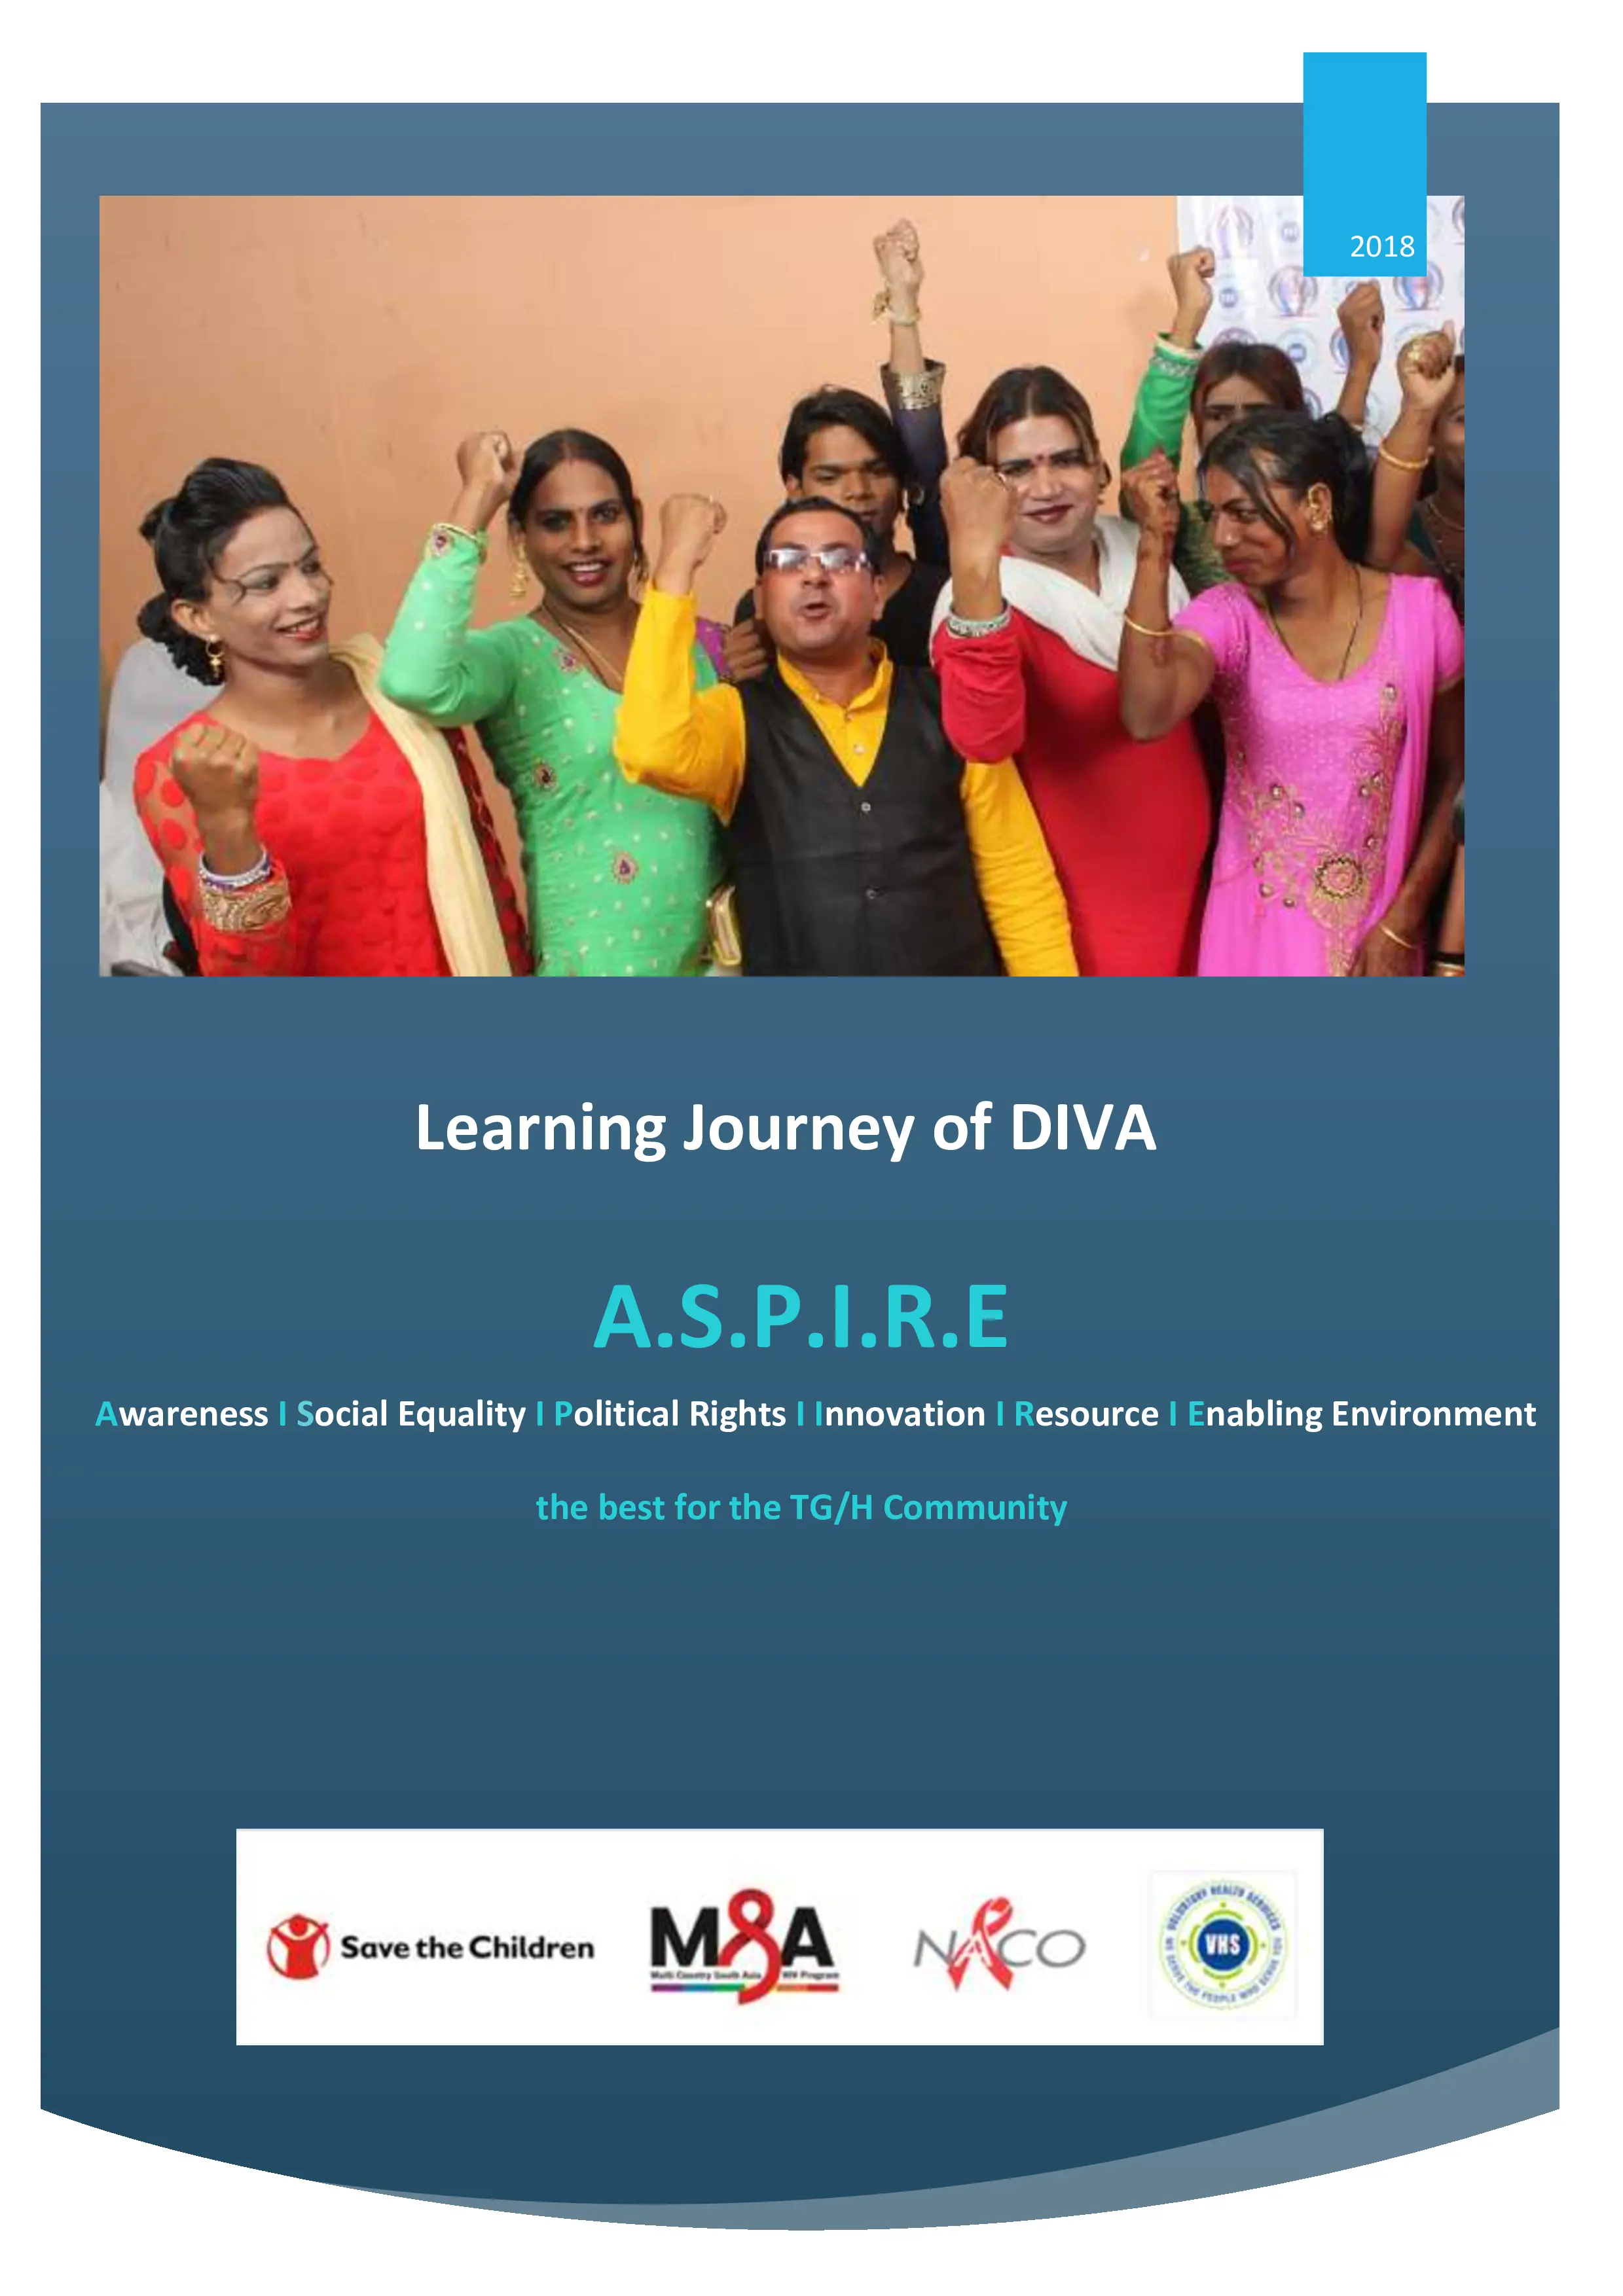 Learning Journey_DIVA Project_ASPIRE